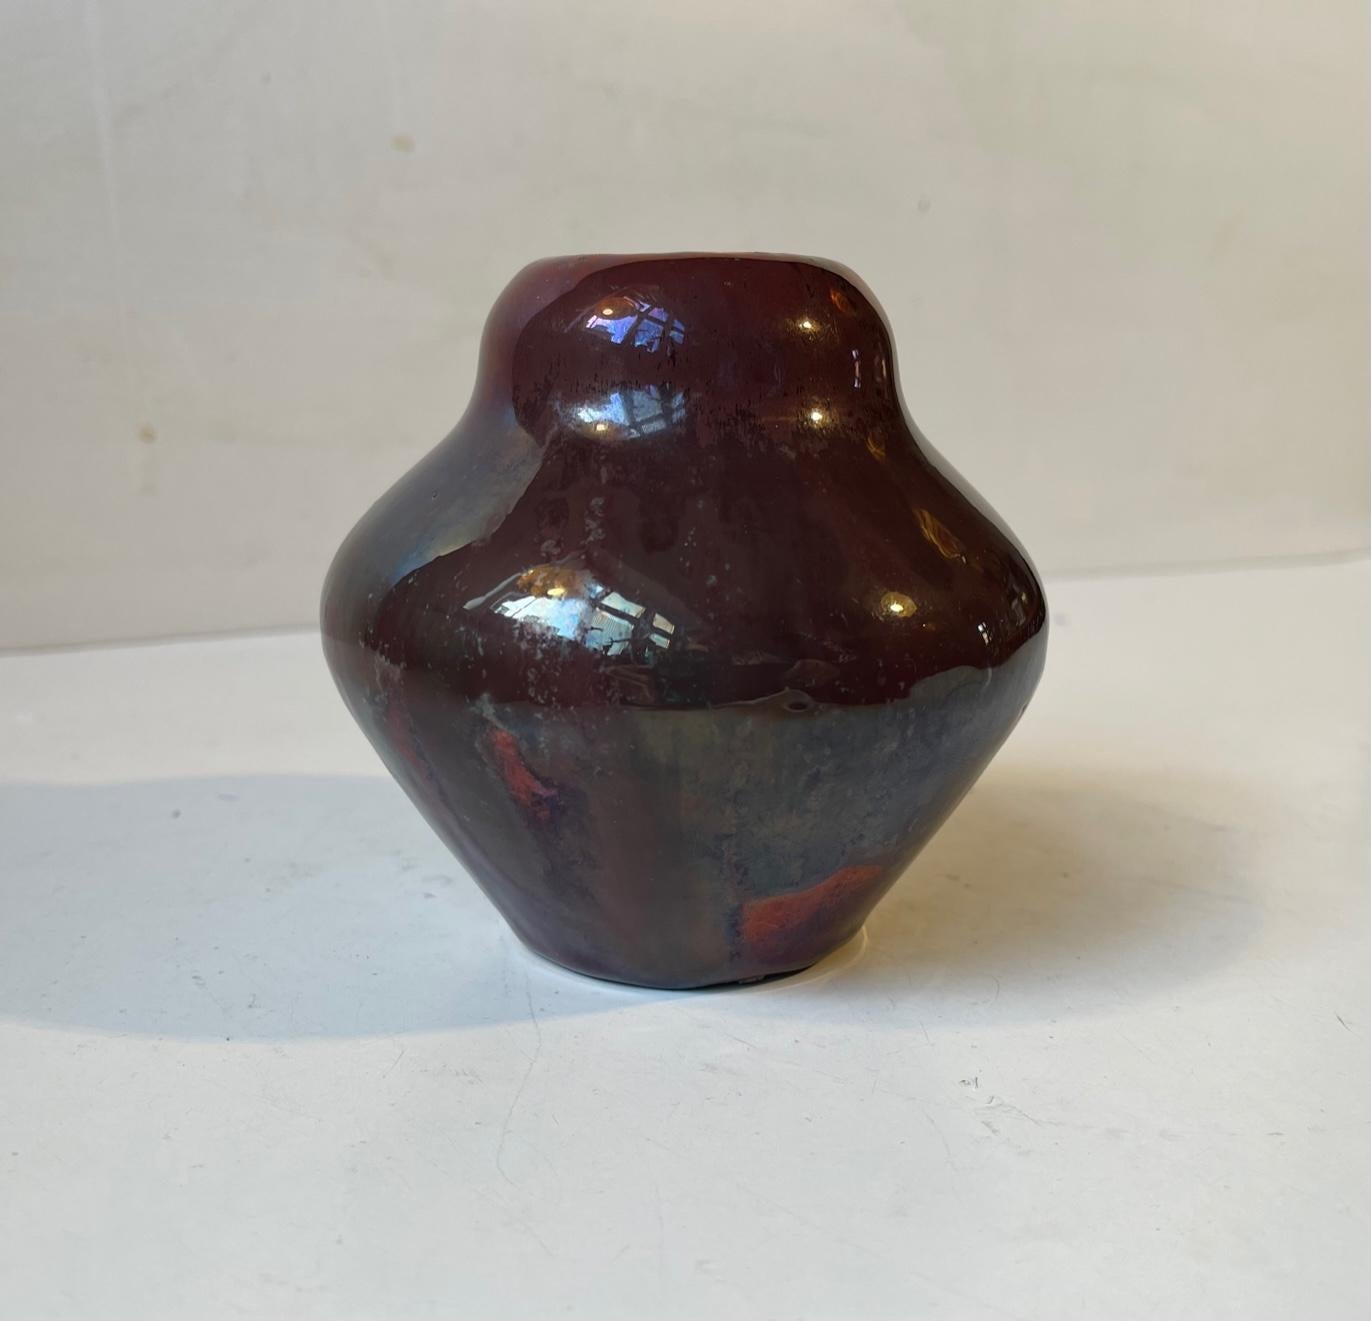 Pottery vase by the danish ceramist Soren Kongstrand. Its a piece unique and it dates from circa 1935. Eksperimental glaze: metallic/copper based lustre glazes burnt and applied several times in the artistic proces. Almost every imaginable color can